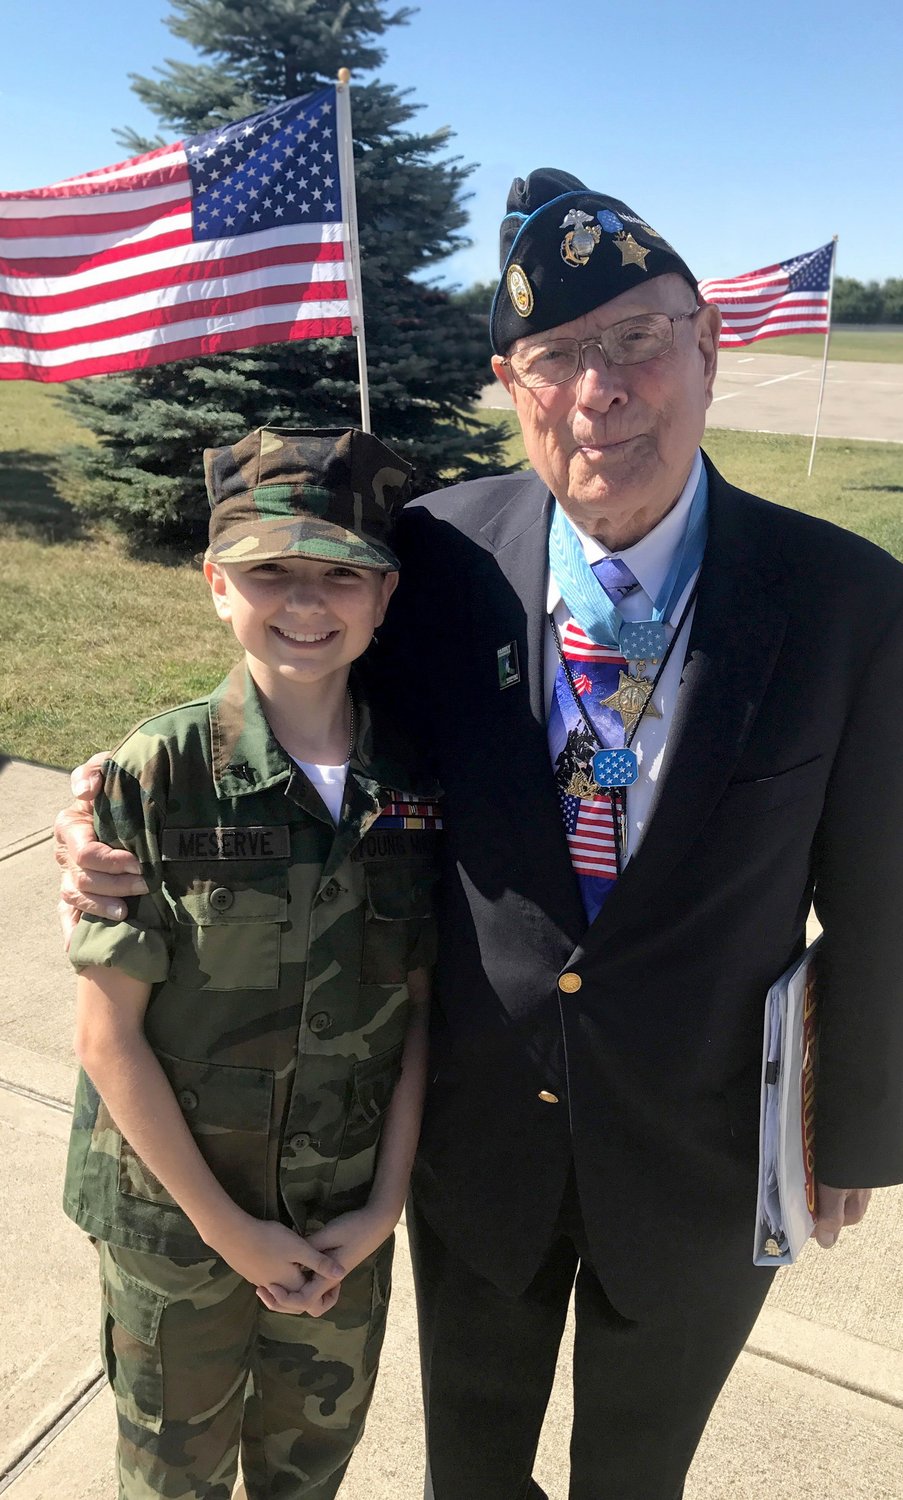 YM/Lance Cpl. Cara Meserve from the Miami Valley Young Marines in Huber Heights, Ohio with Medal of Honor recipient Hershel Woody Williams.